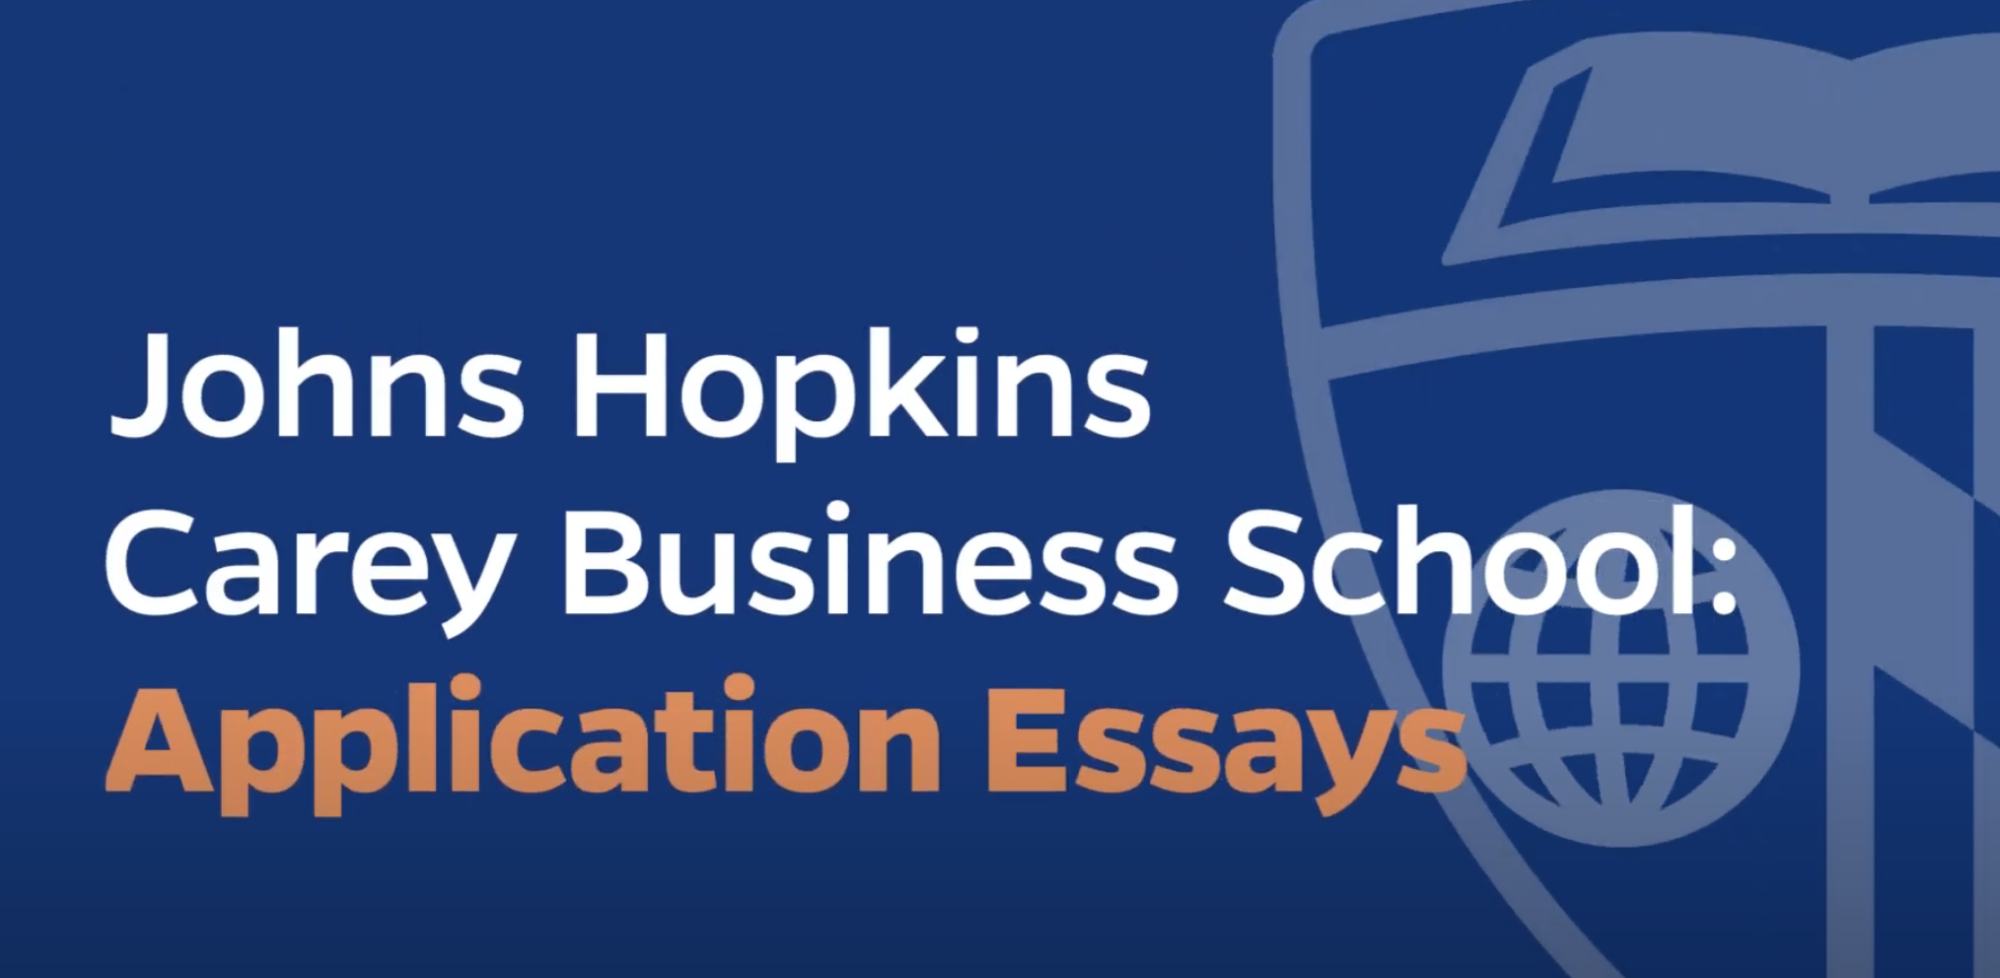 text that says Johns Hopkins Carey Business School: Application Essays with a blue background